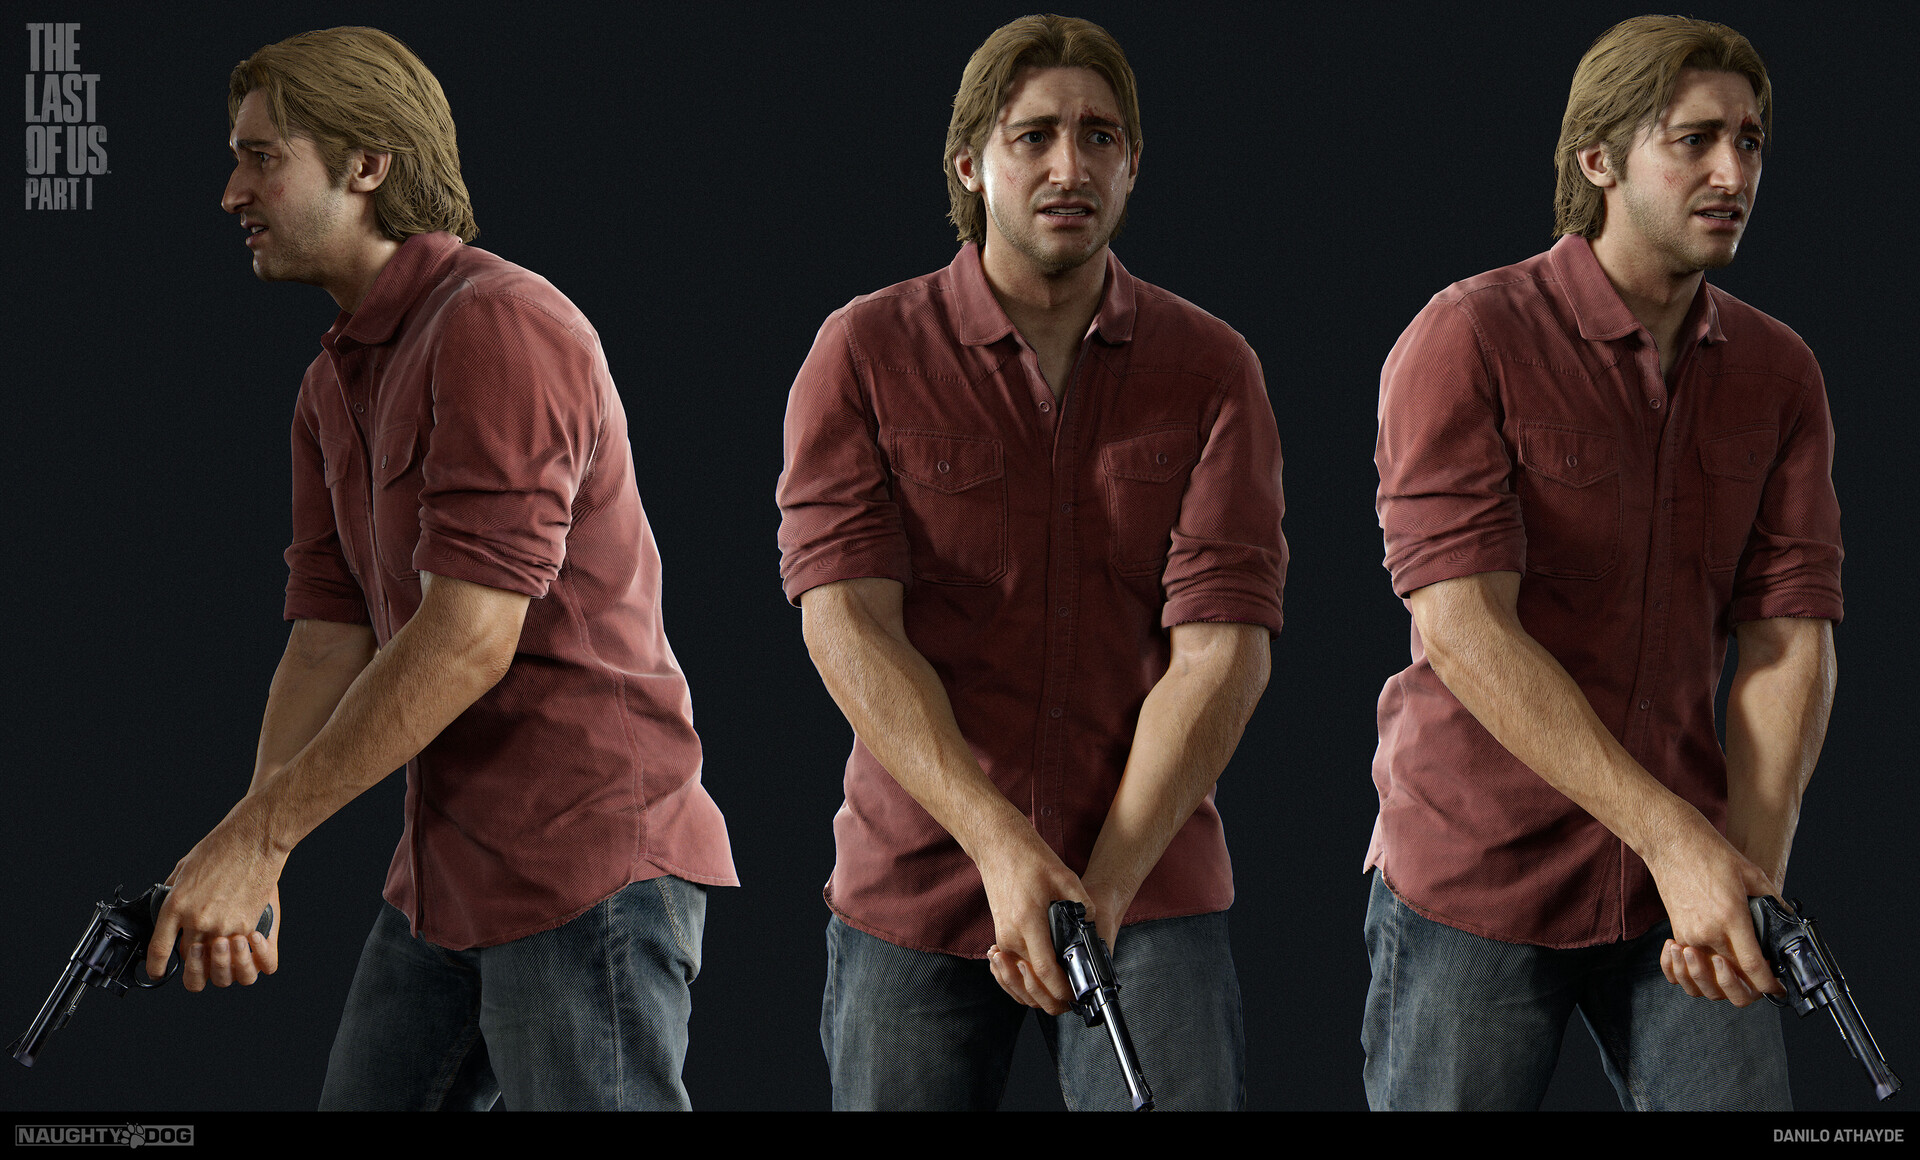 Tommy in The Last Of Us remake : r/gaming